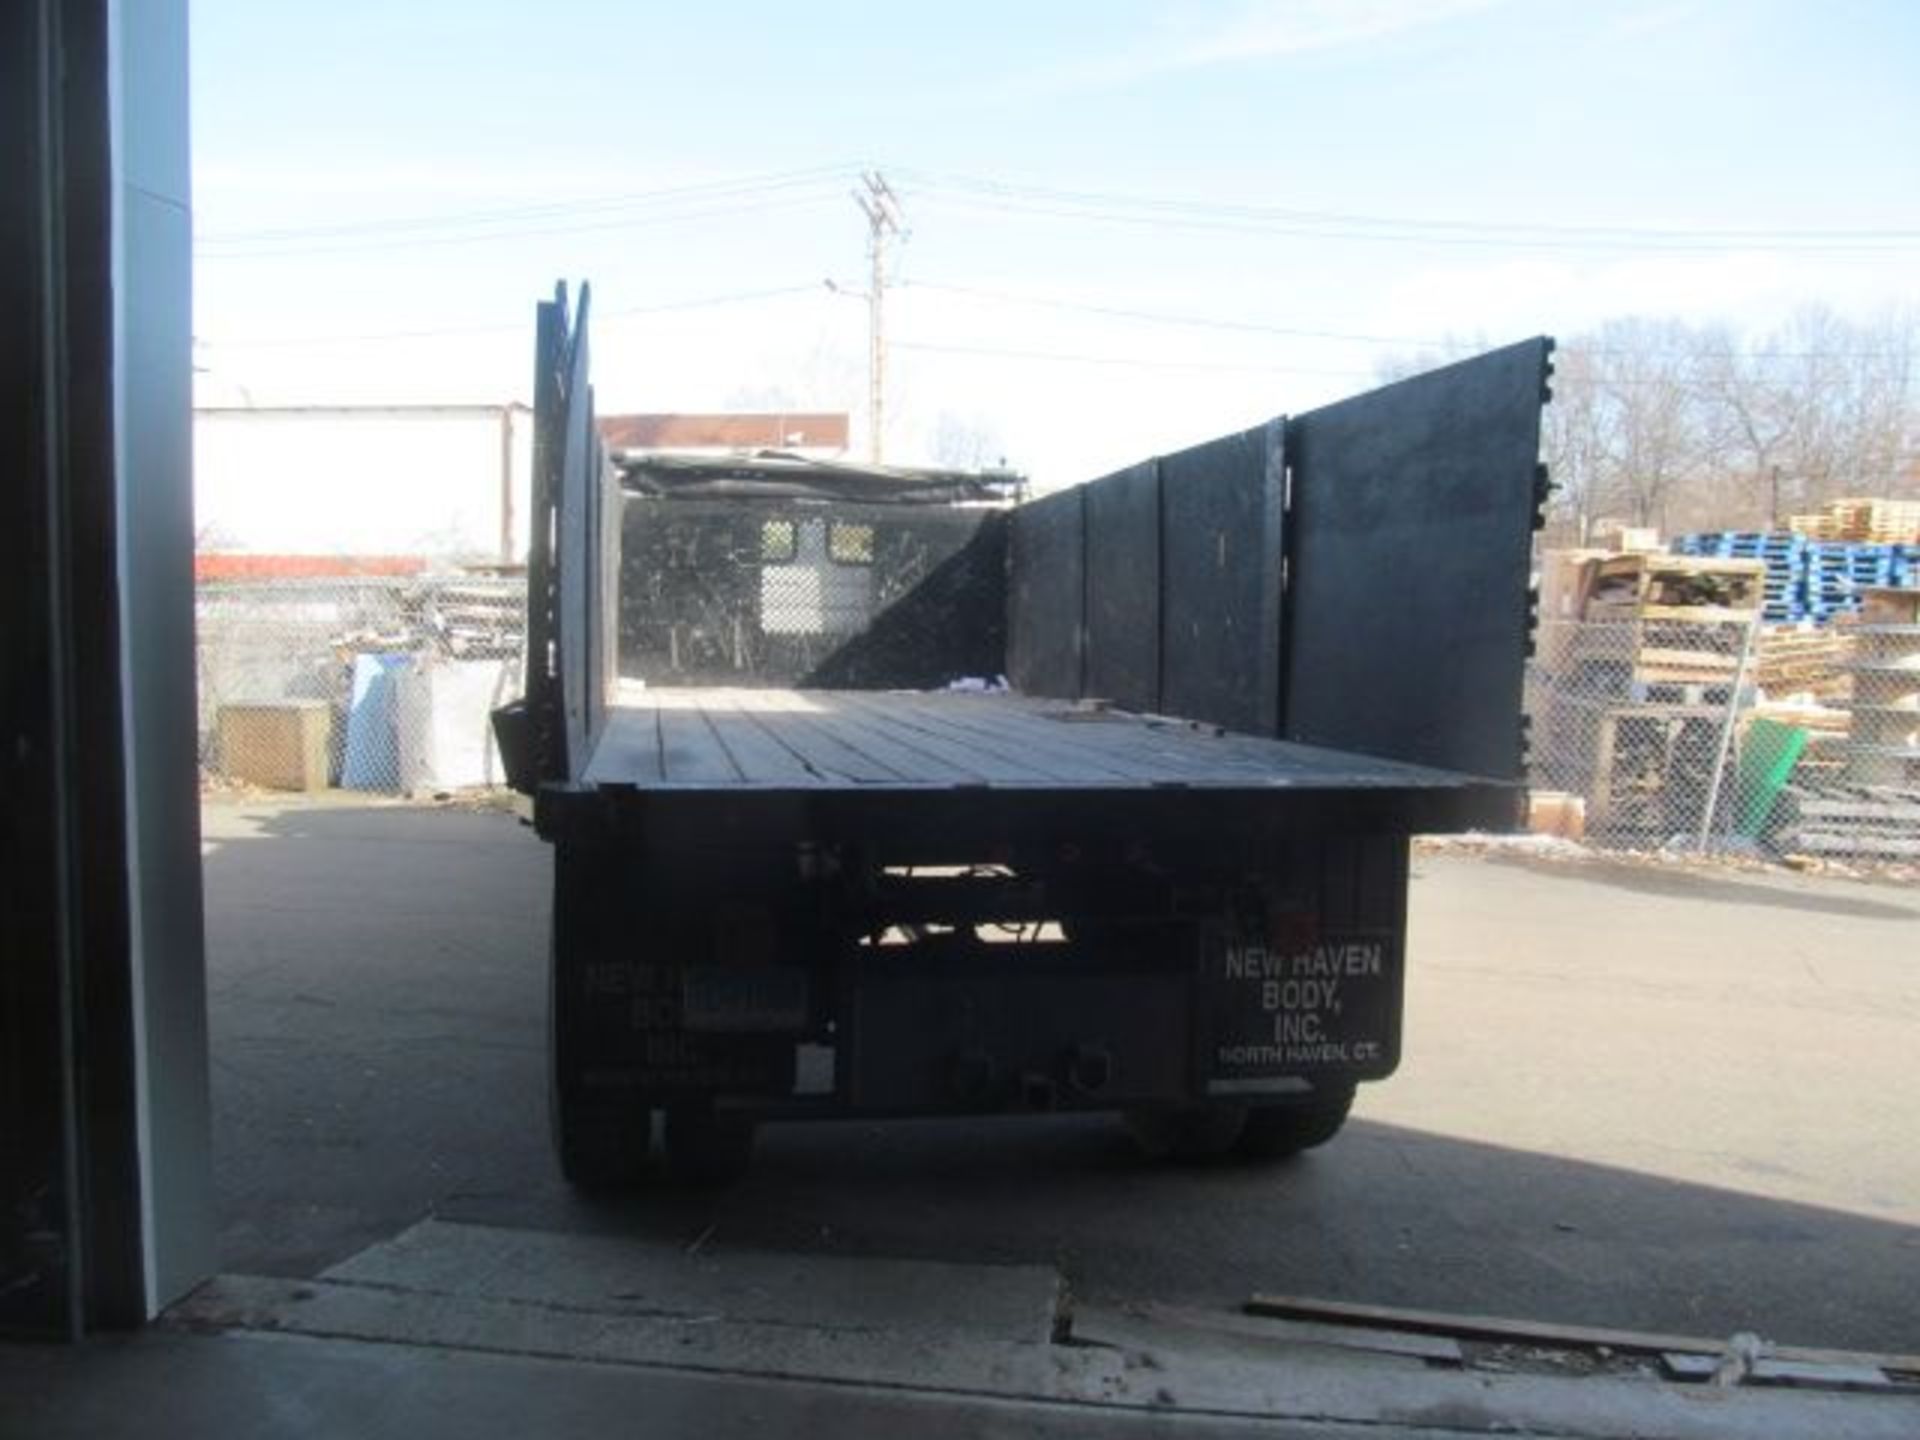 1997 Mack CS200P dump truck, Diesel, odometer reads 148,593, 6-speed transmission, single axle, with - Image 4 of 4